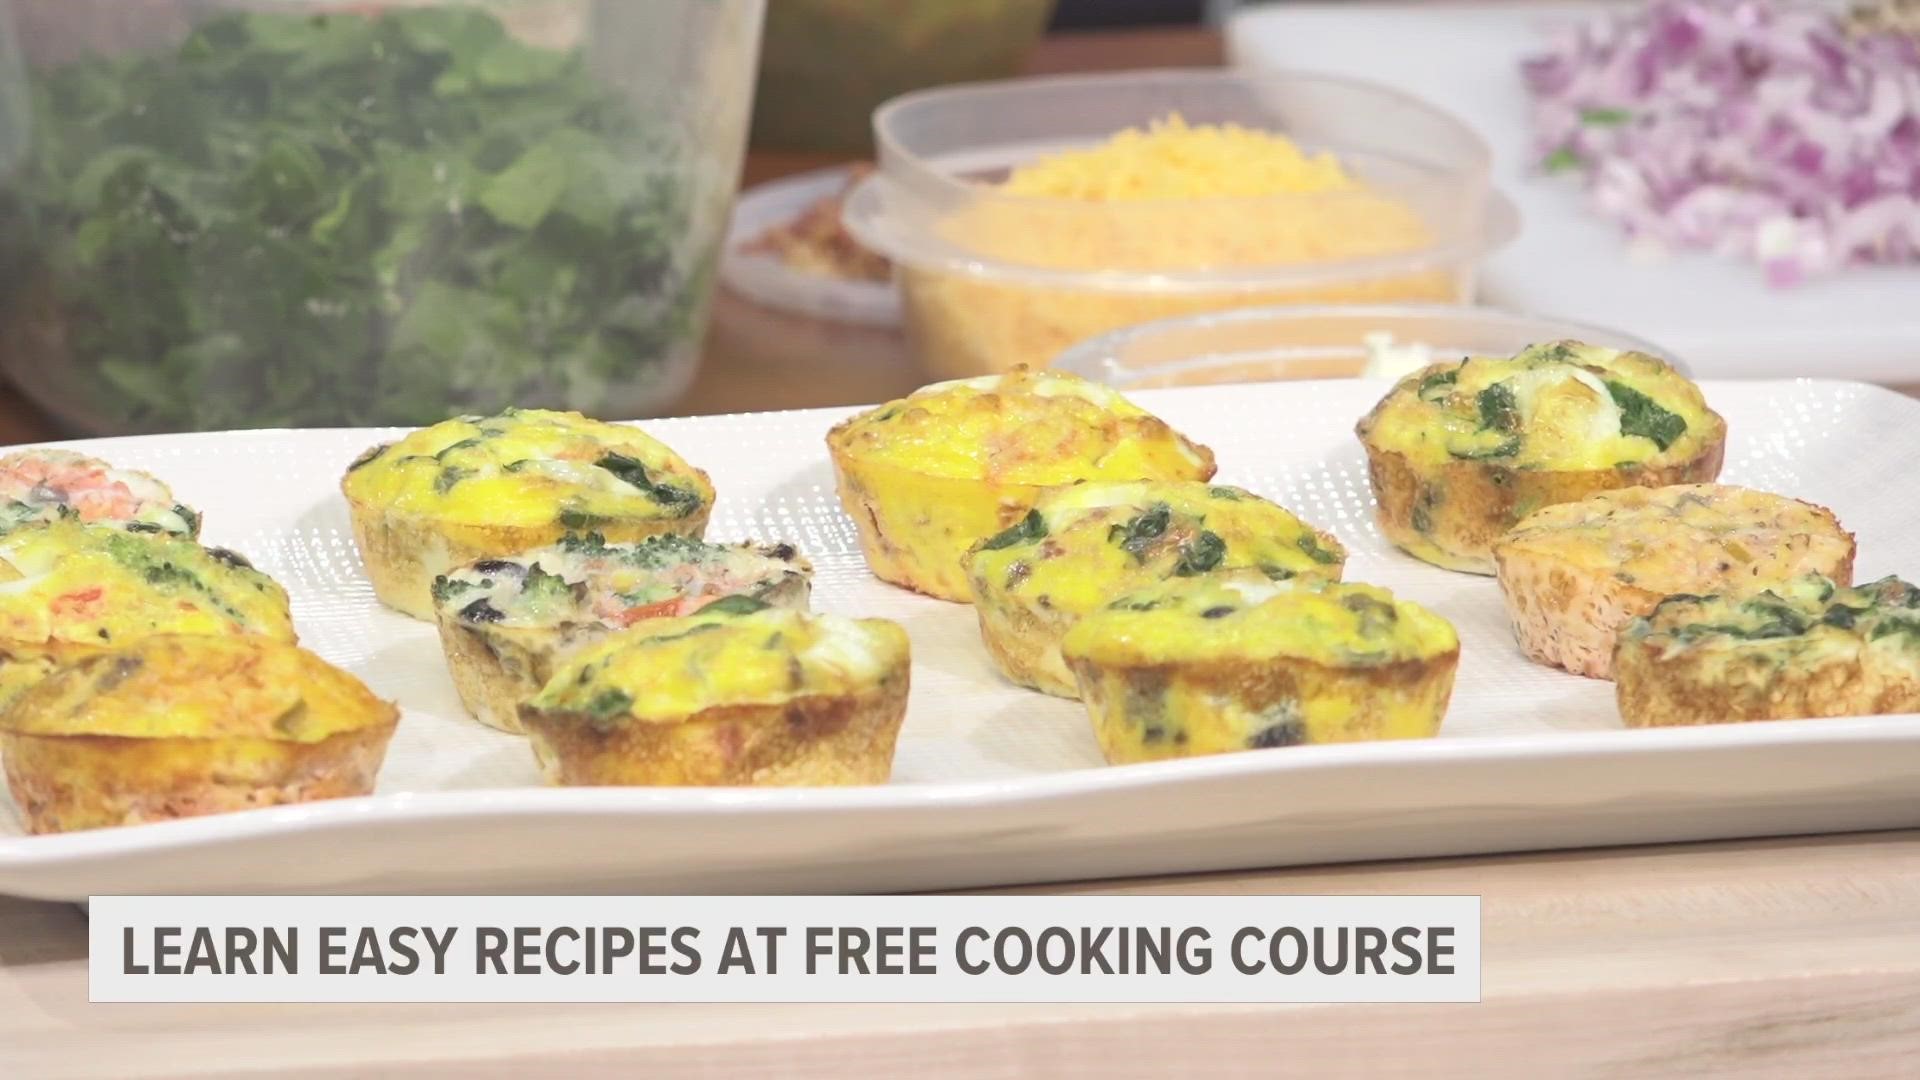 If your mornings are too busy for a healthy breakfast, Corewell Health has you covered with these quick recipes.